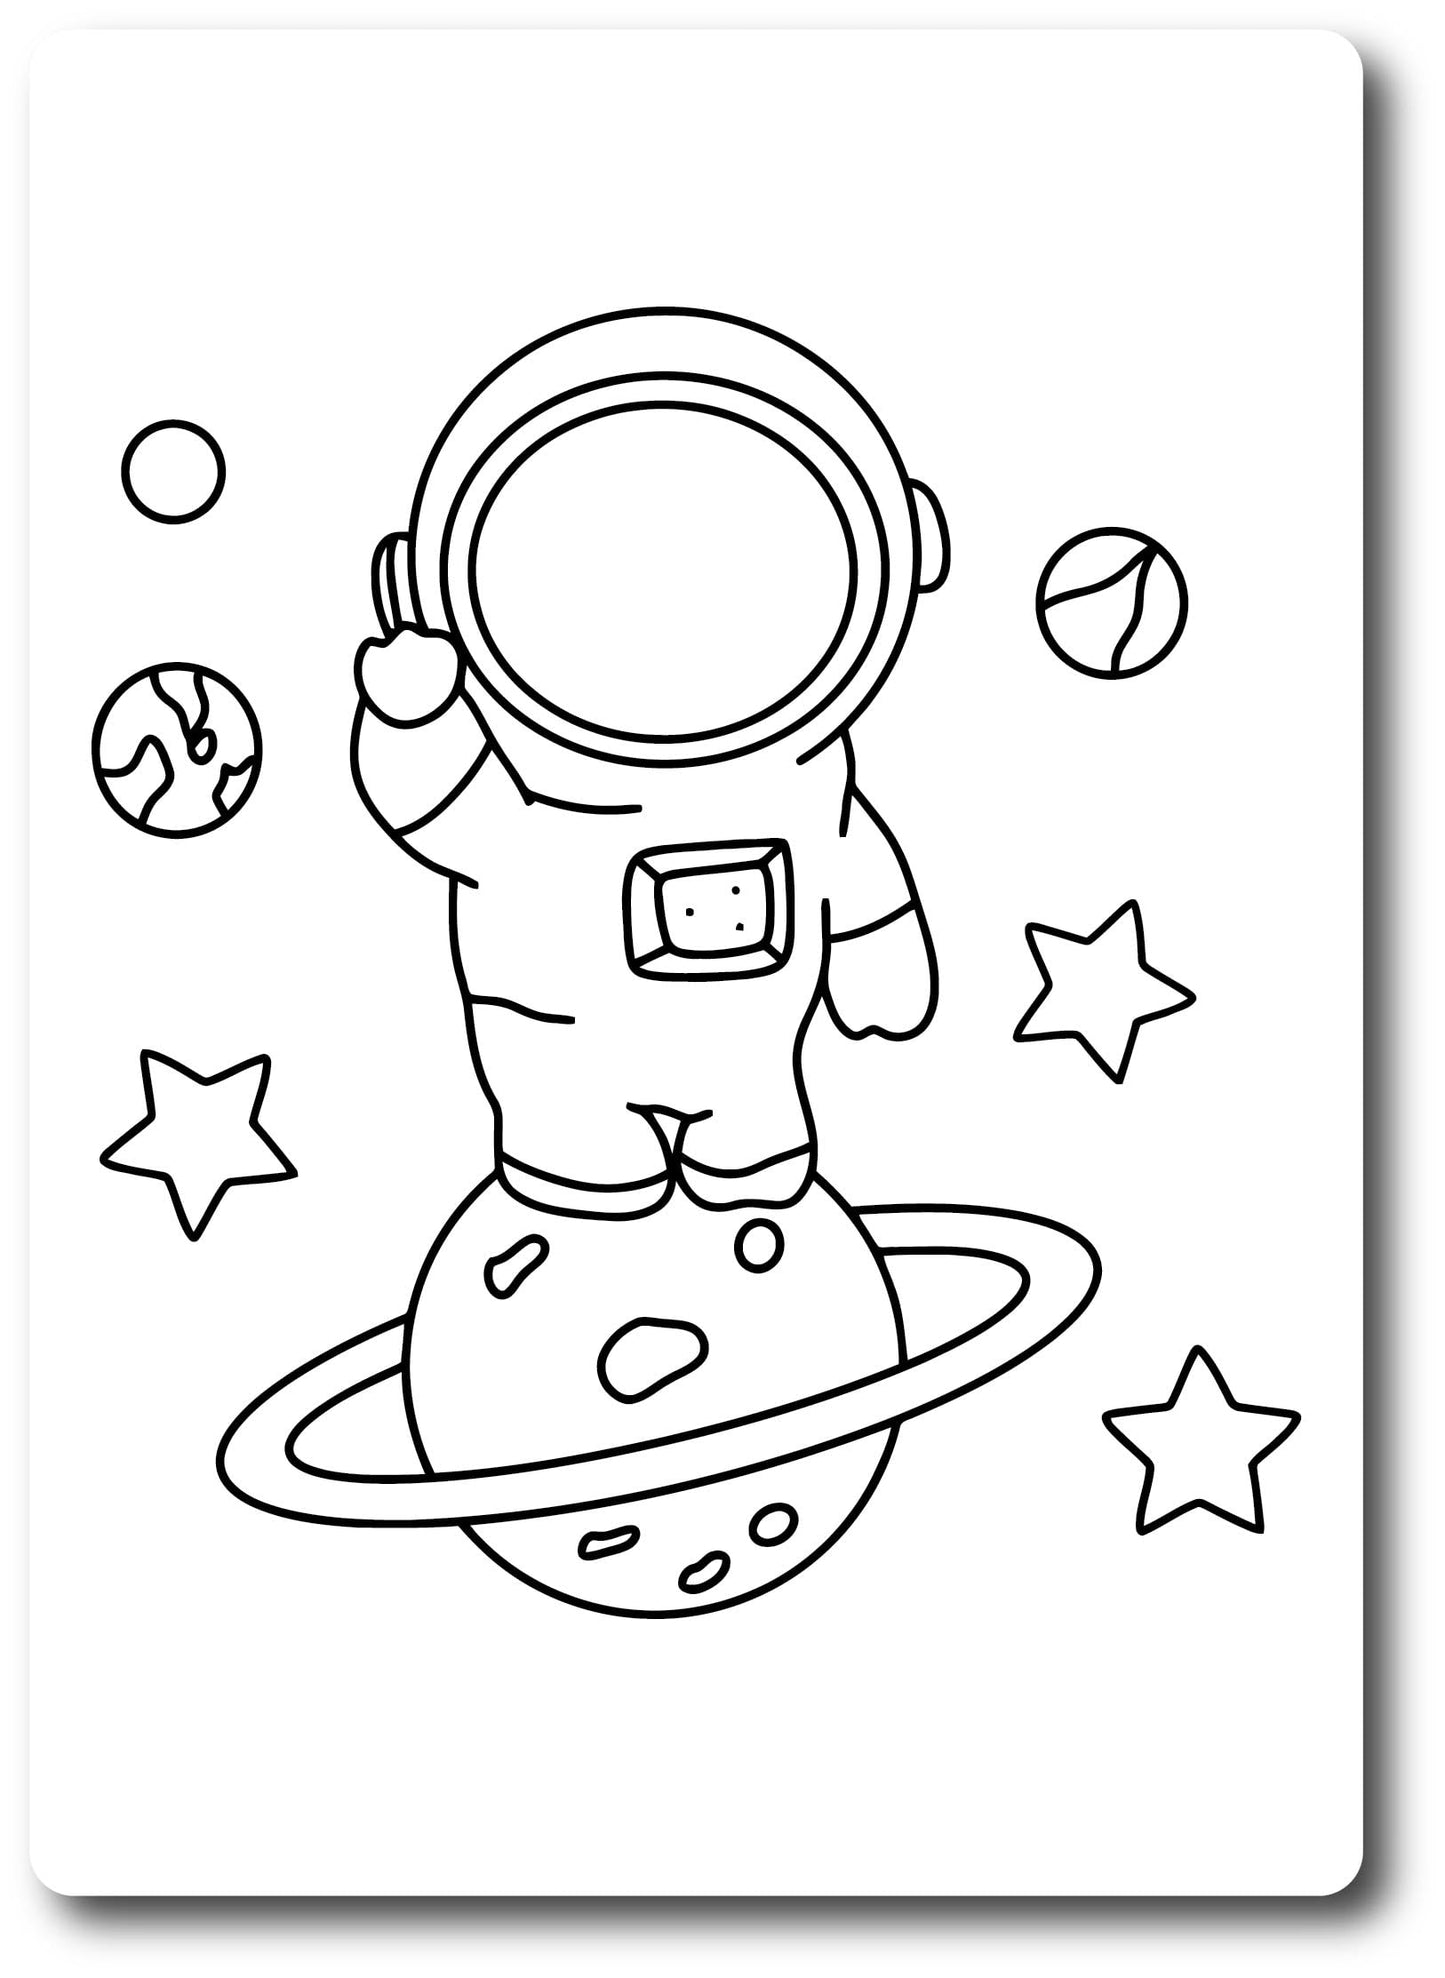 Magnet Me Up Color Your Own Astronaut Space and Star DIY Coloring Magnet Decal, 5x7 Inch, Perfect Creative Artistic Gift Idea, Refrigerator Decoration, Kids Expression Craft and Activity, Made in USA